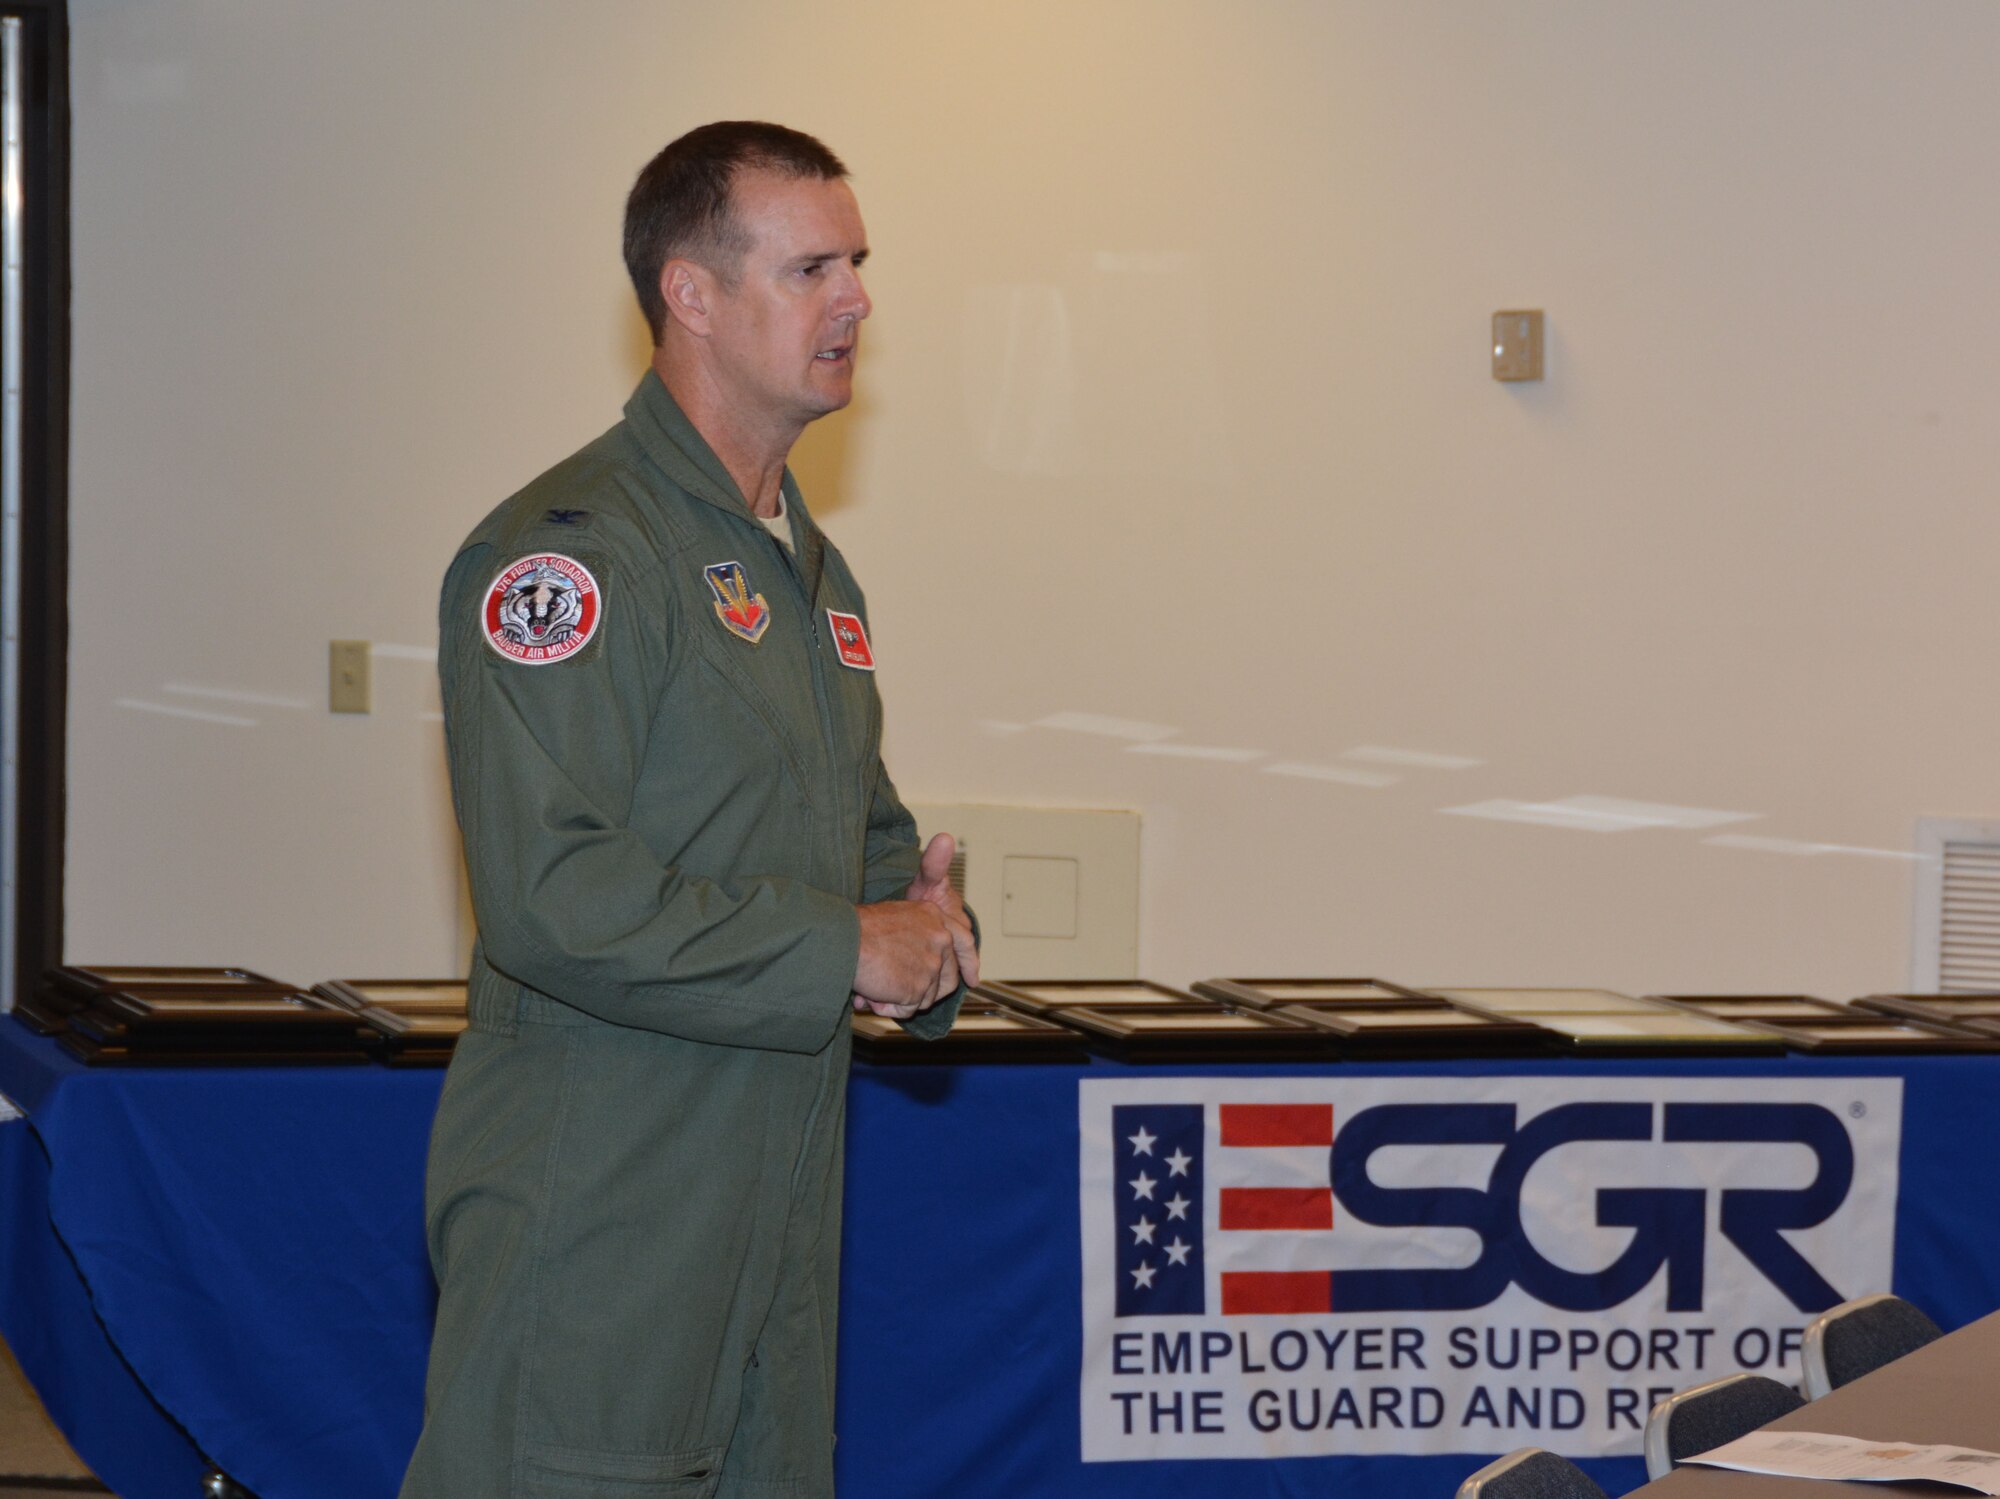 Col. Jeffrey Wiegand, 115 Fighter Wing commander, addressed approximately 70 employers and employees from the Madison area attended an Employer Support of the Guard and Reserve event Sept. 5 at the 115th FW, Madison, Wis.  Wiegand recognized employers who went above and beyond in their support of the Guard and Reserve members. (Air National Guard photo by Staff Sgt. Ryan Roth, released)